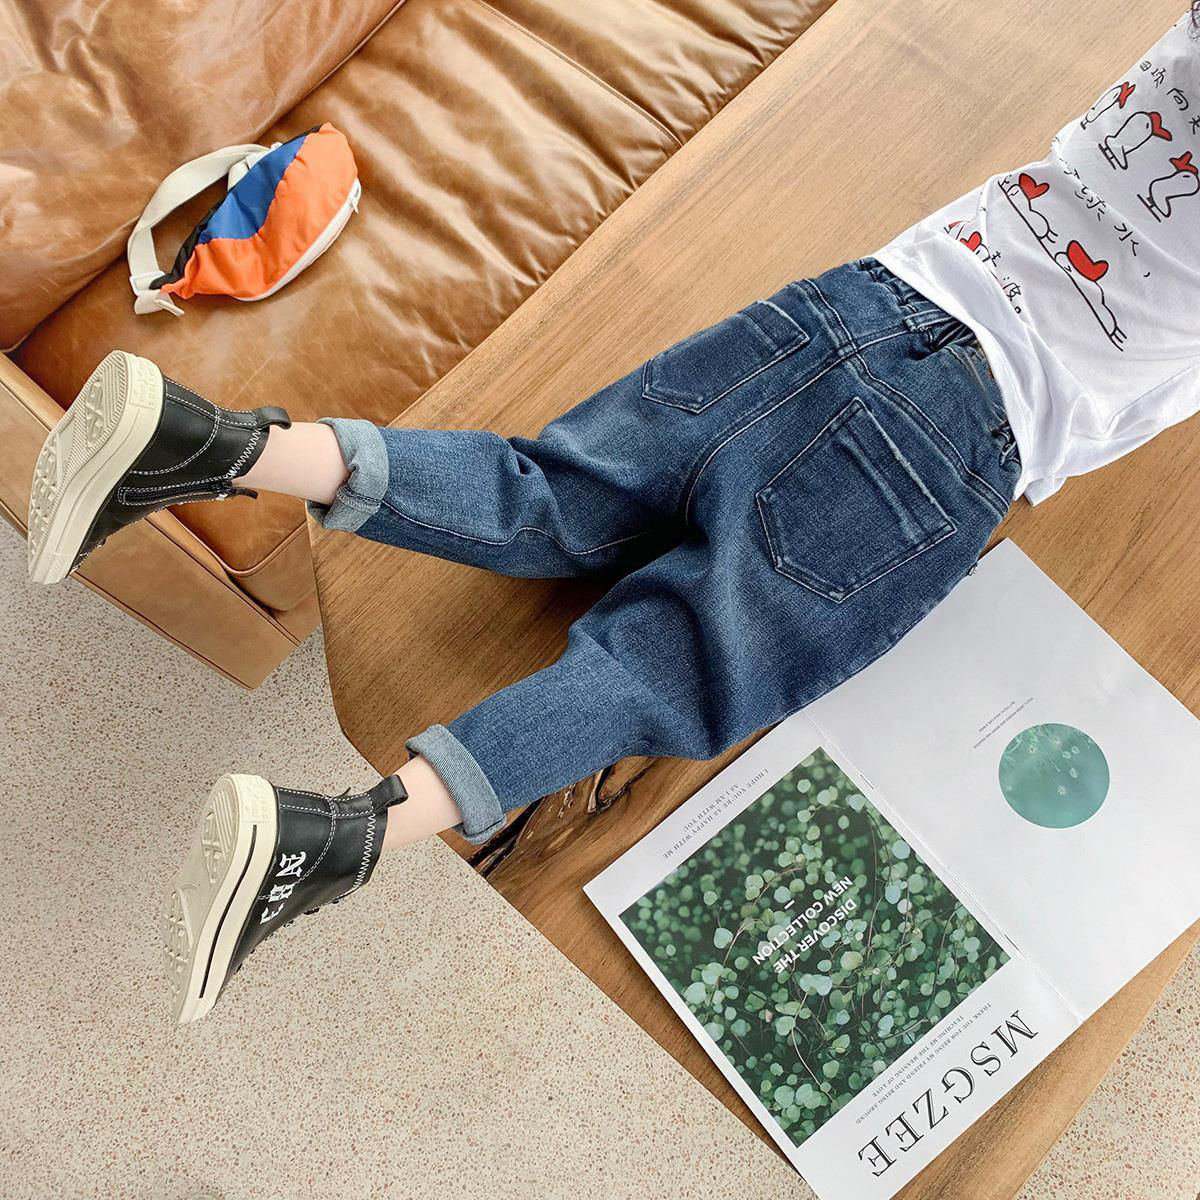 Boys' Plush jeans autumn and winter new foreign style elastic children's wear boys' thickened warm cotton pants